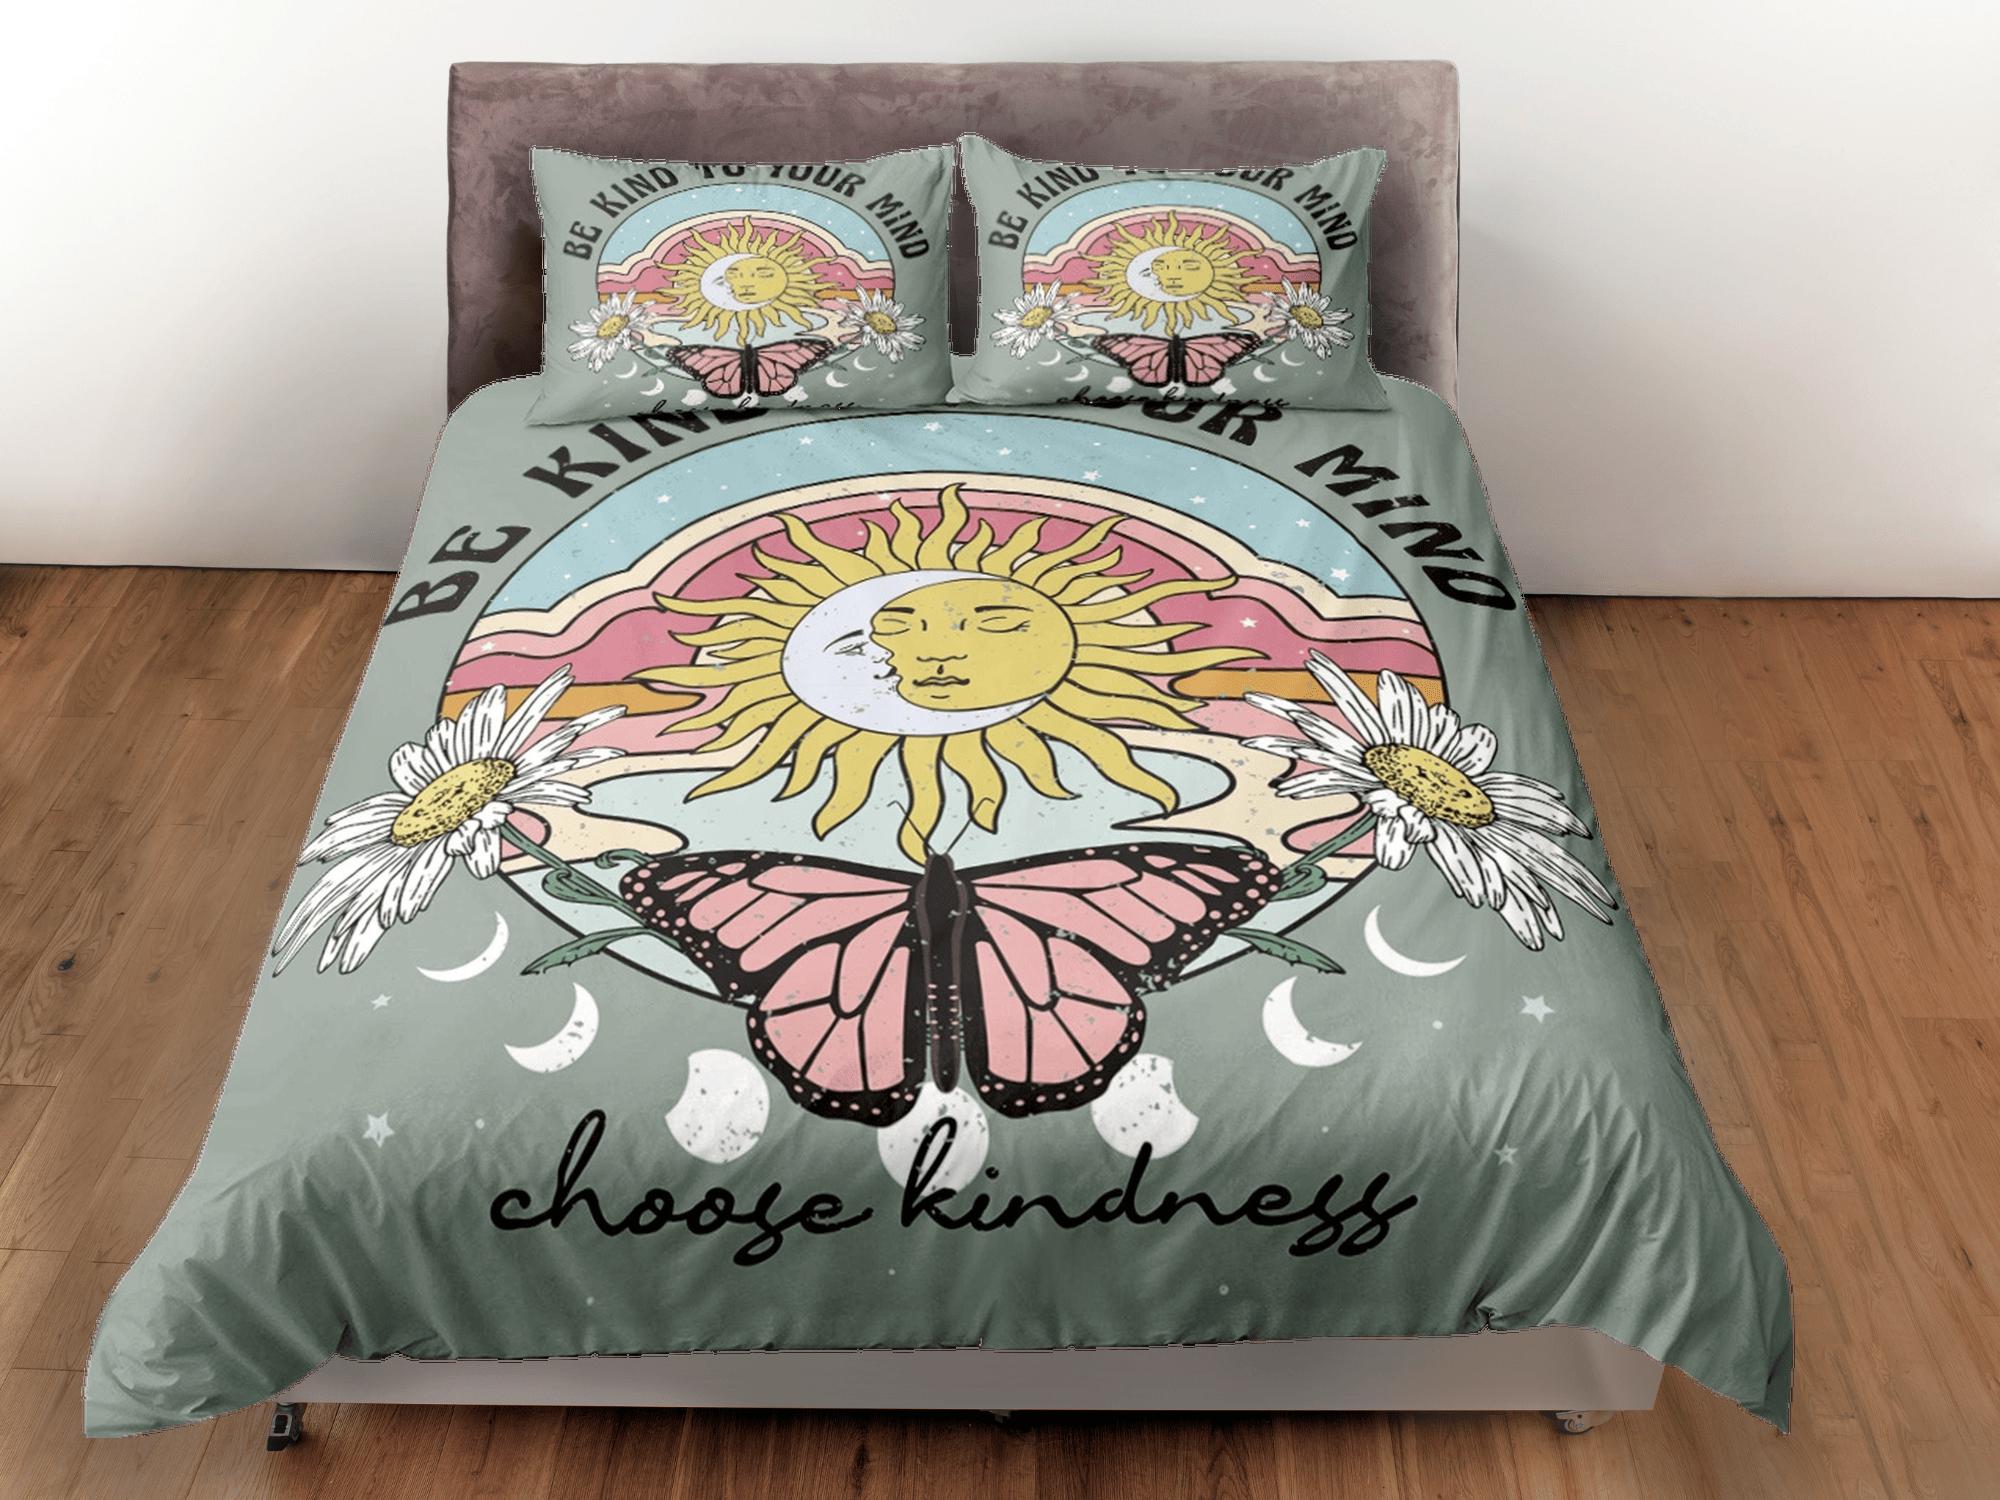 daintyduvet Celestial bedding 90s nostalgia hippie bedding retro duvet cover set, colorful bedding, teens and adult duvet cover, maximalist sun and moon